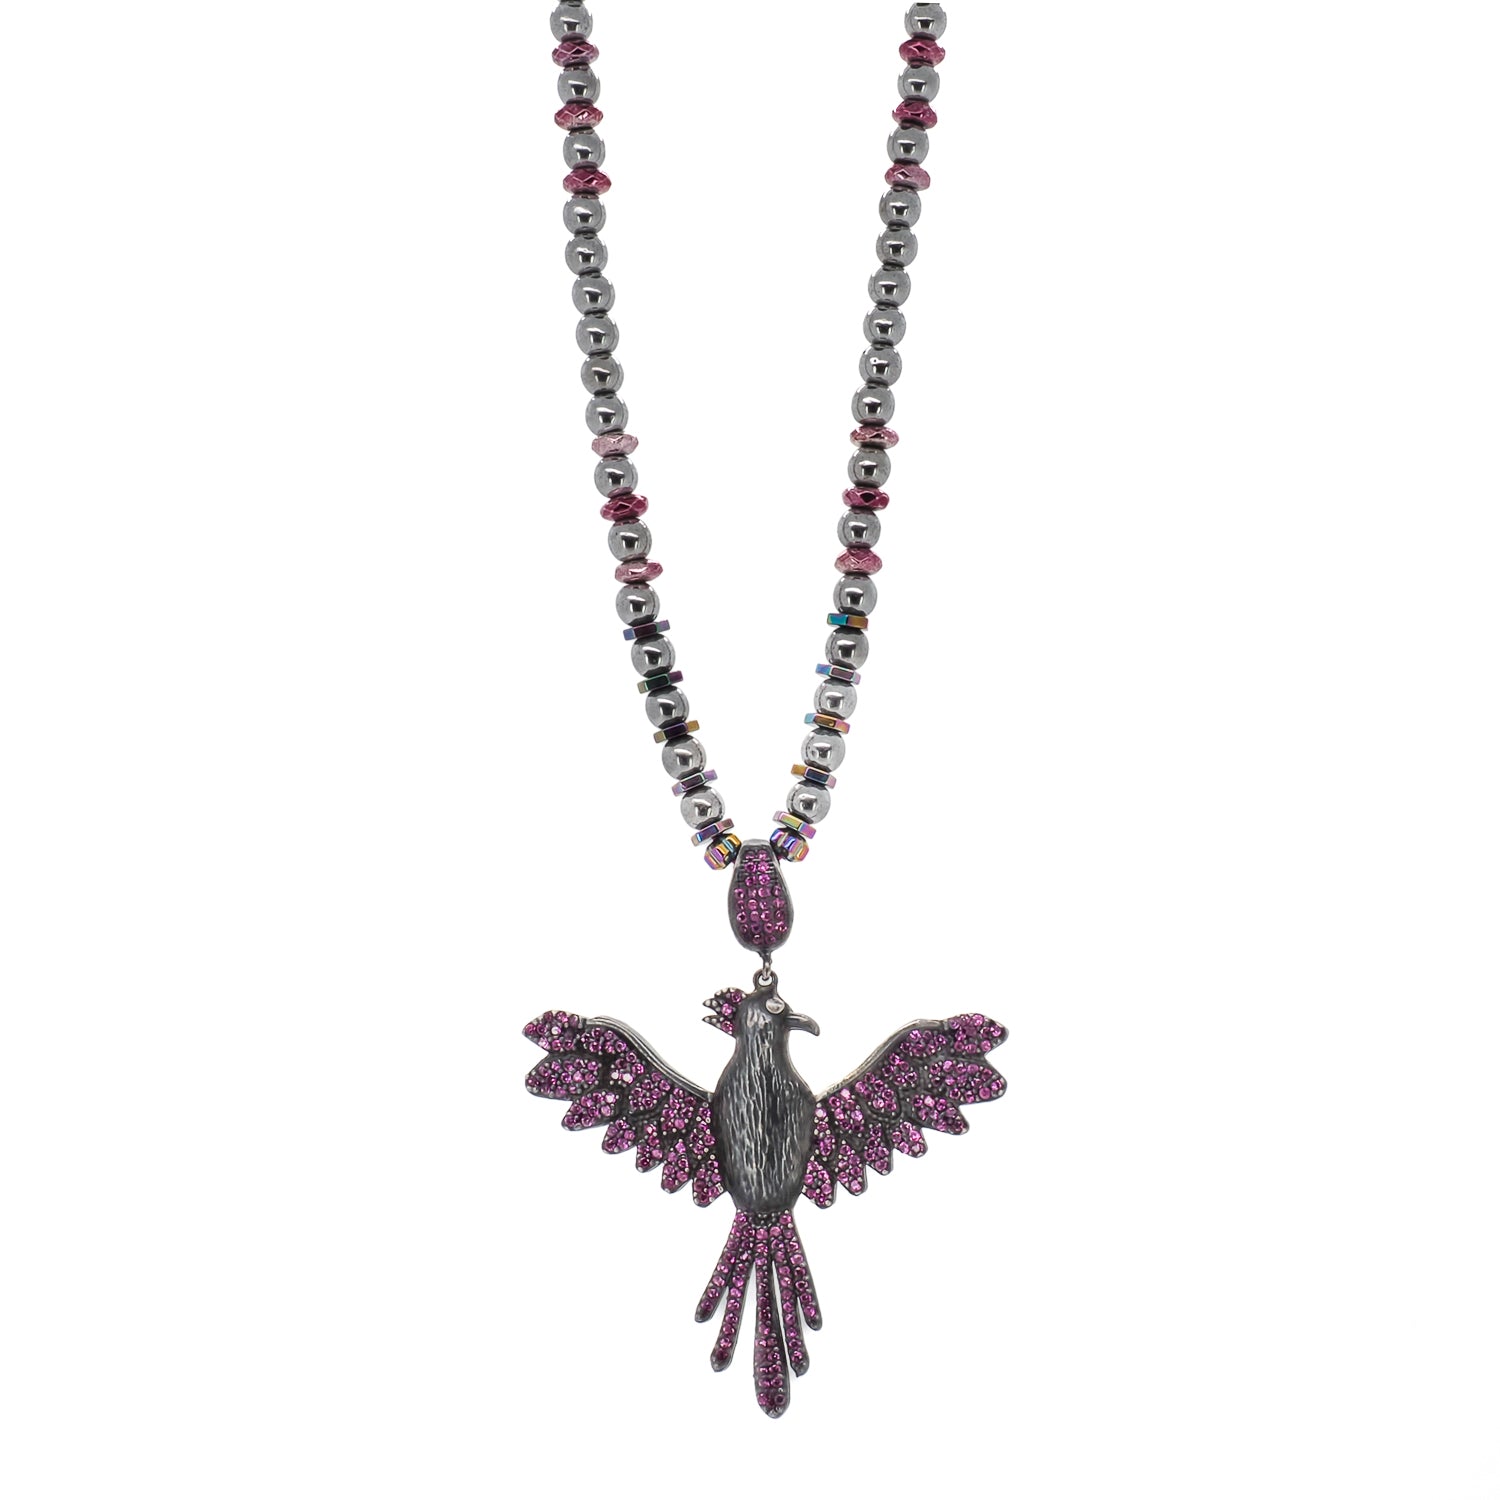 A one-of-a-kind necklace with silver hematite stone beads and a handmade Phoenix pendant, representing rebirth and immortality.